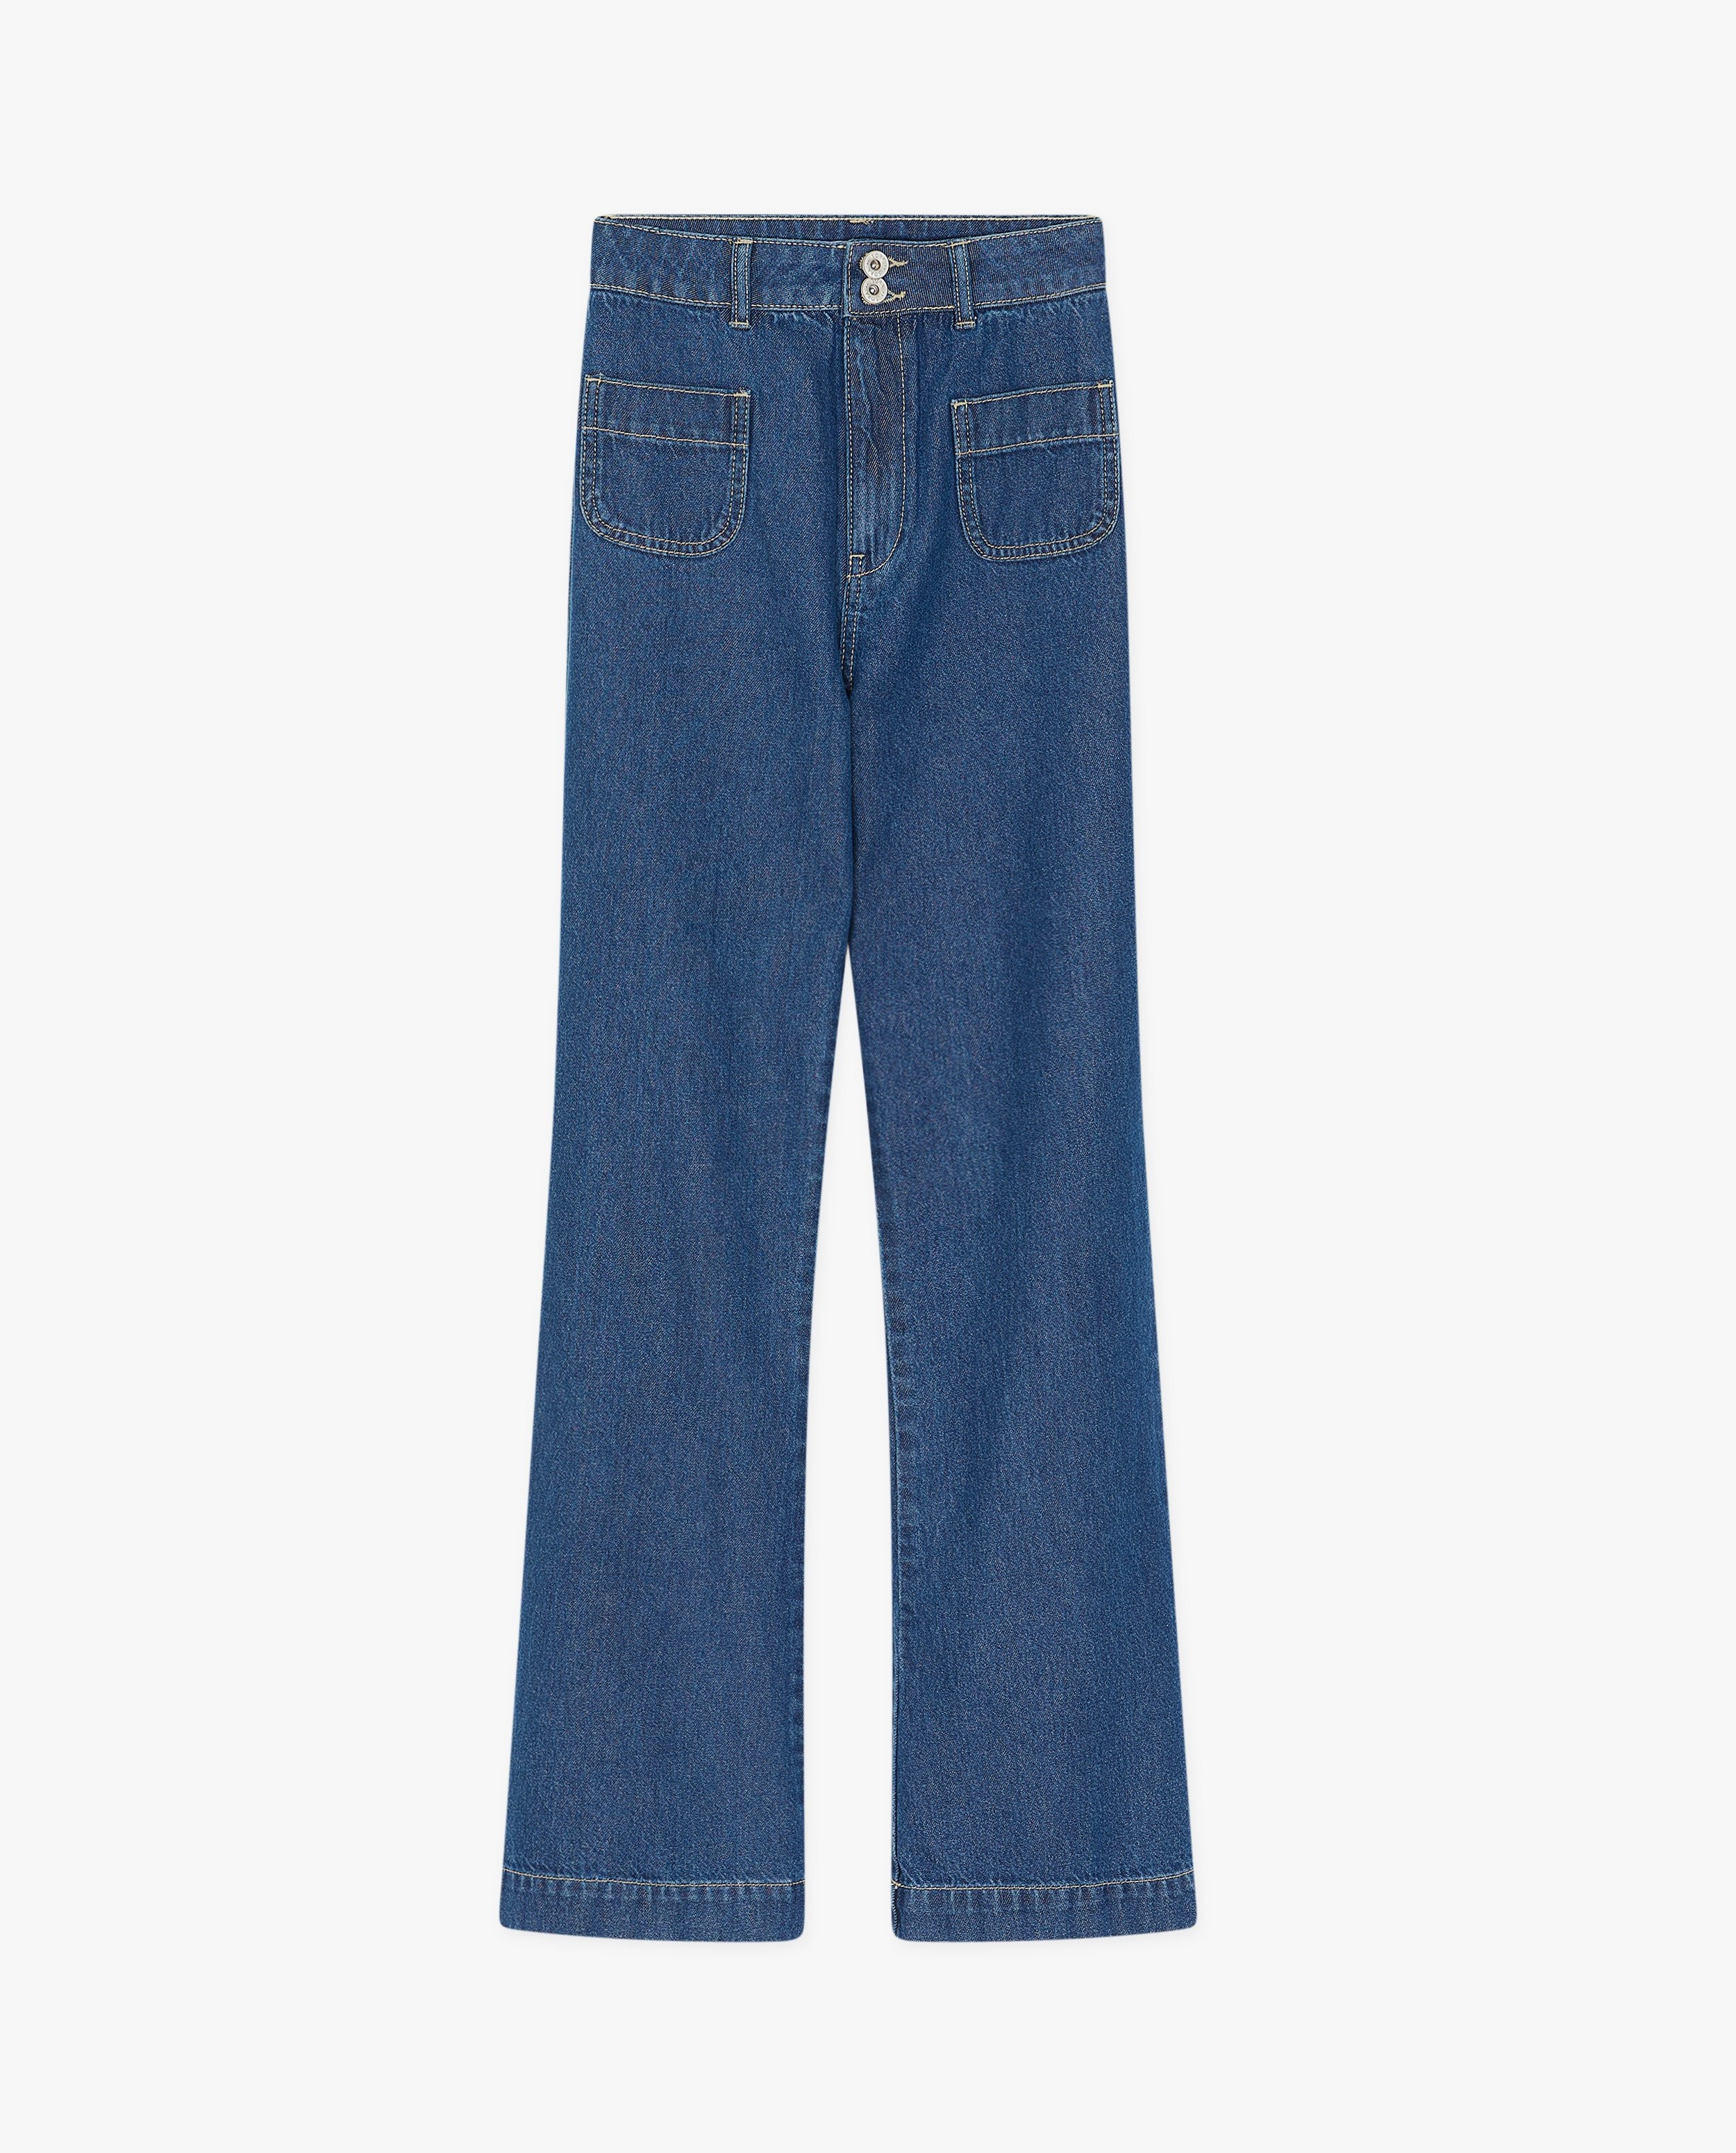 Jeans - Donkerblauwe jeans, flared fit